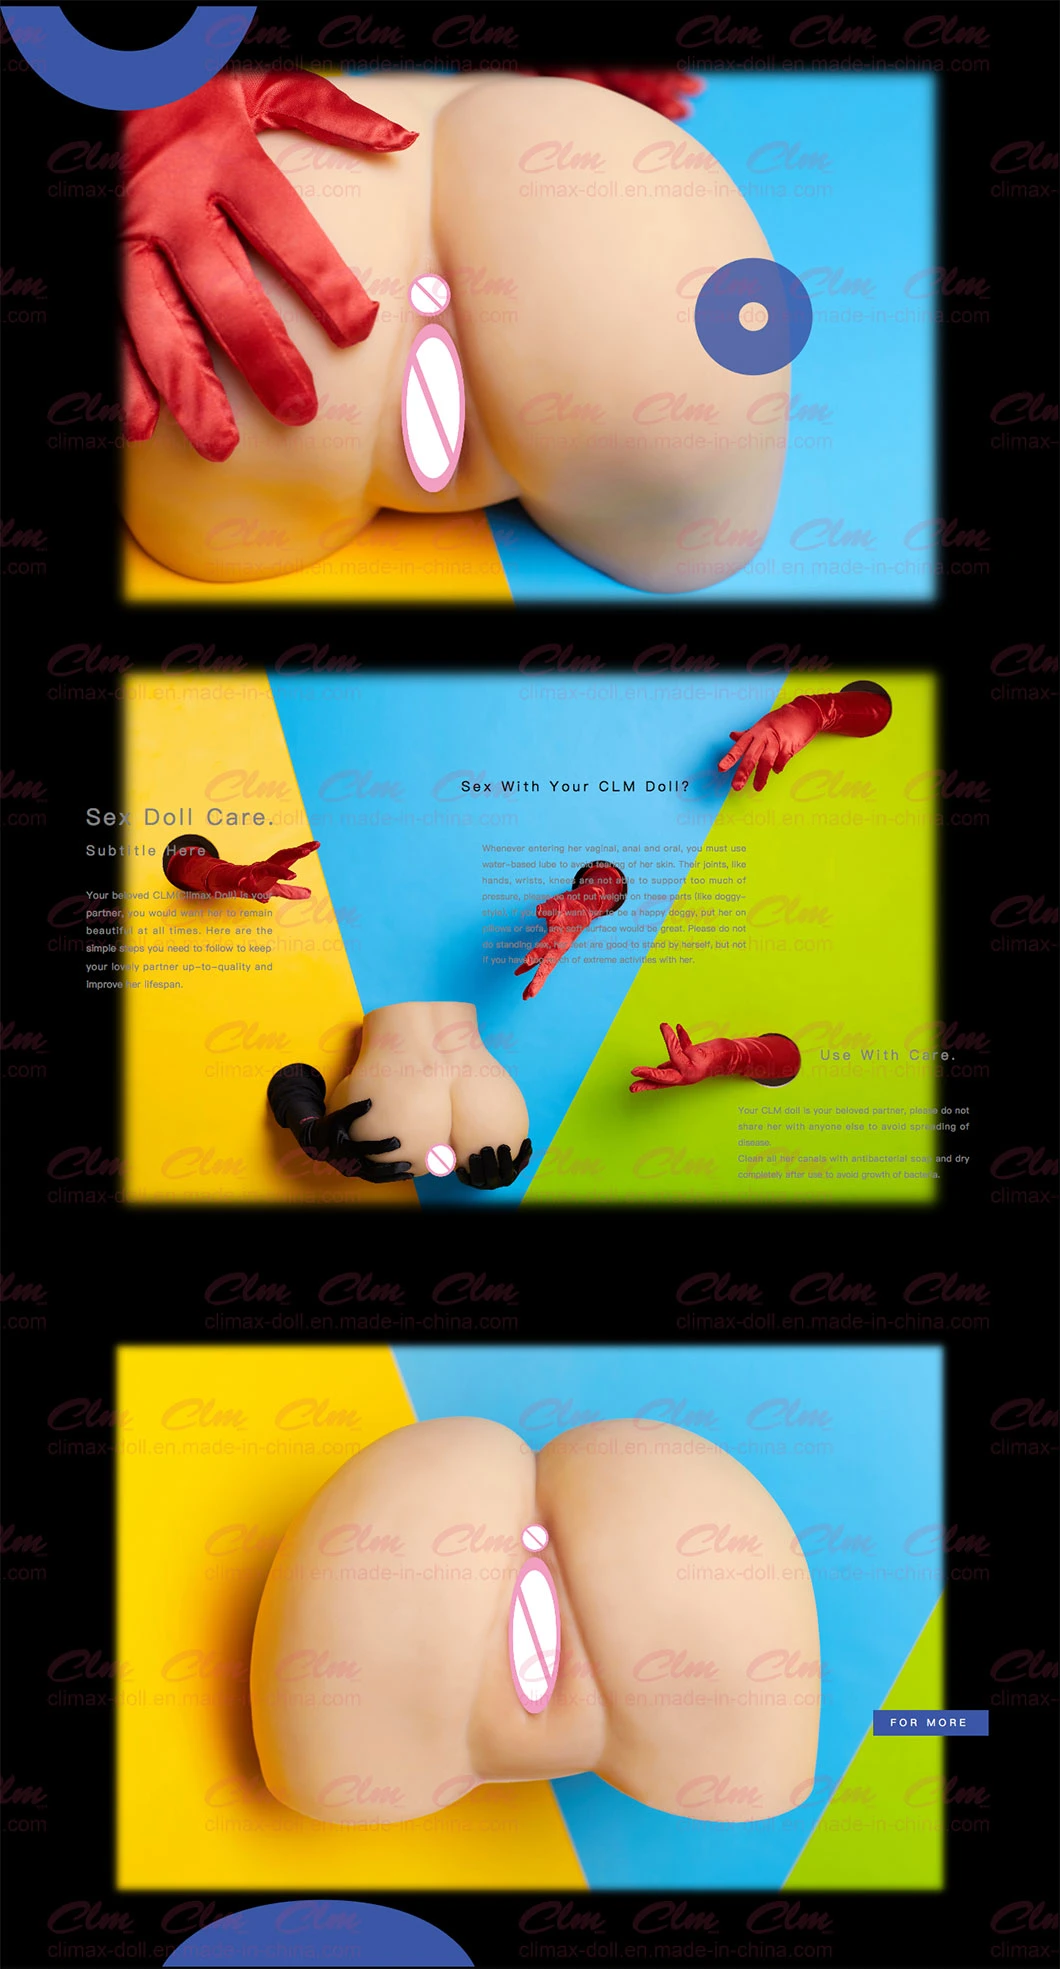 Clm (Climax Doll) Silicone Male Sex Toy Big Ass with Pusssy and Anal Masturbator